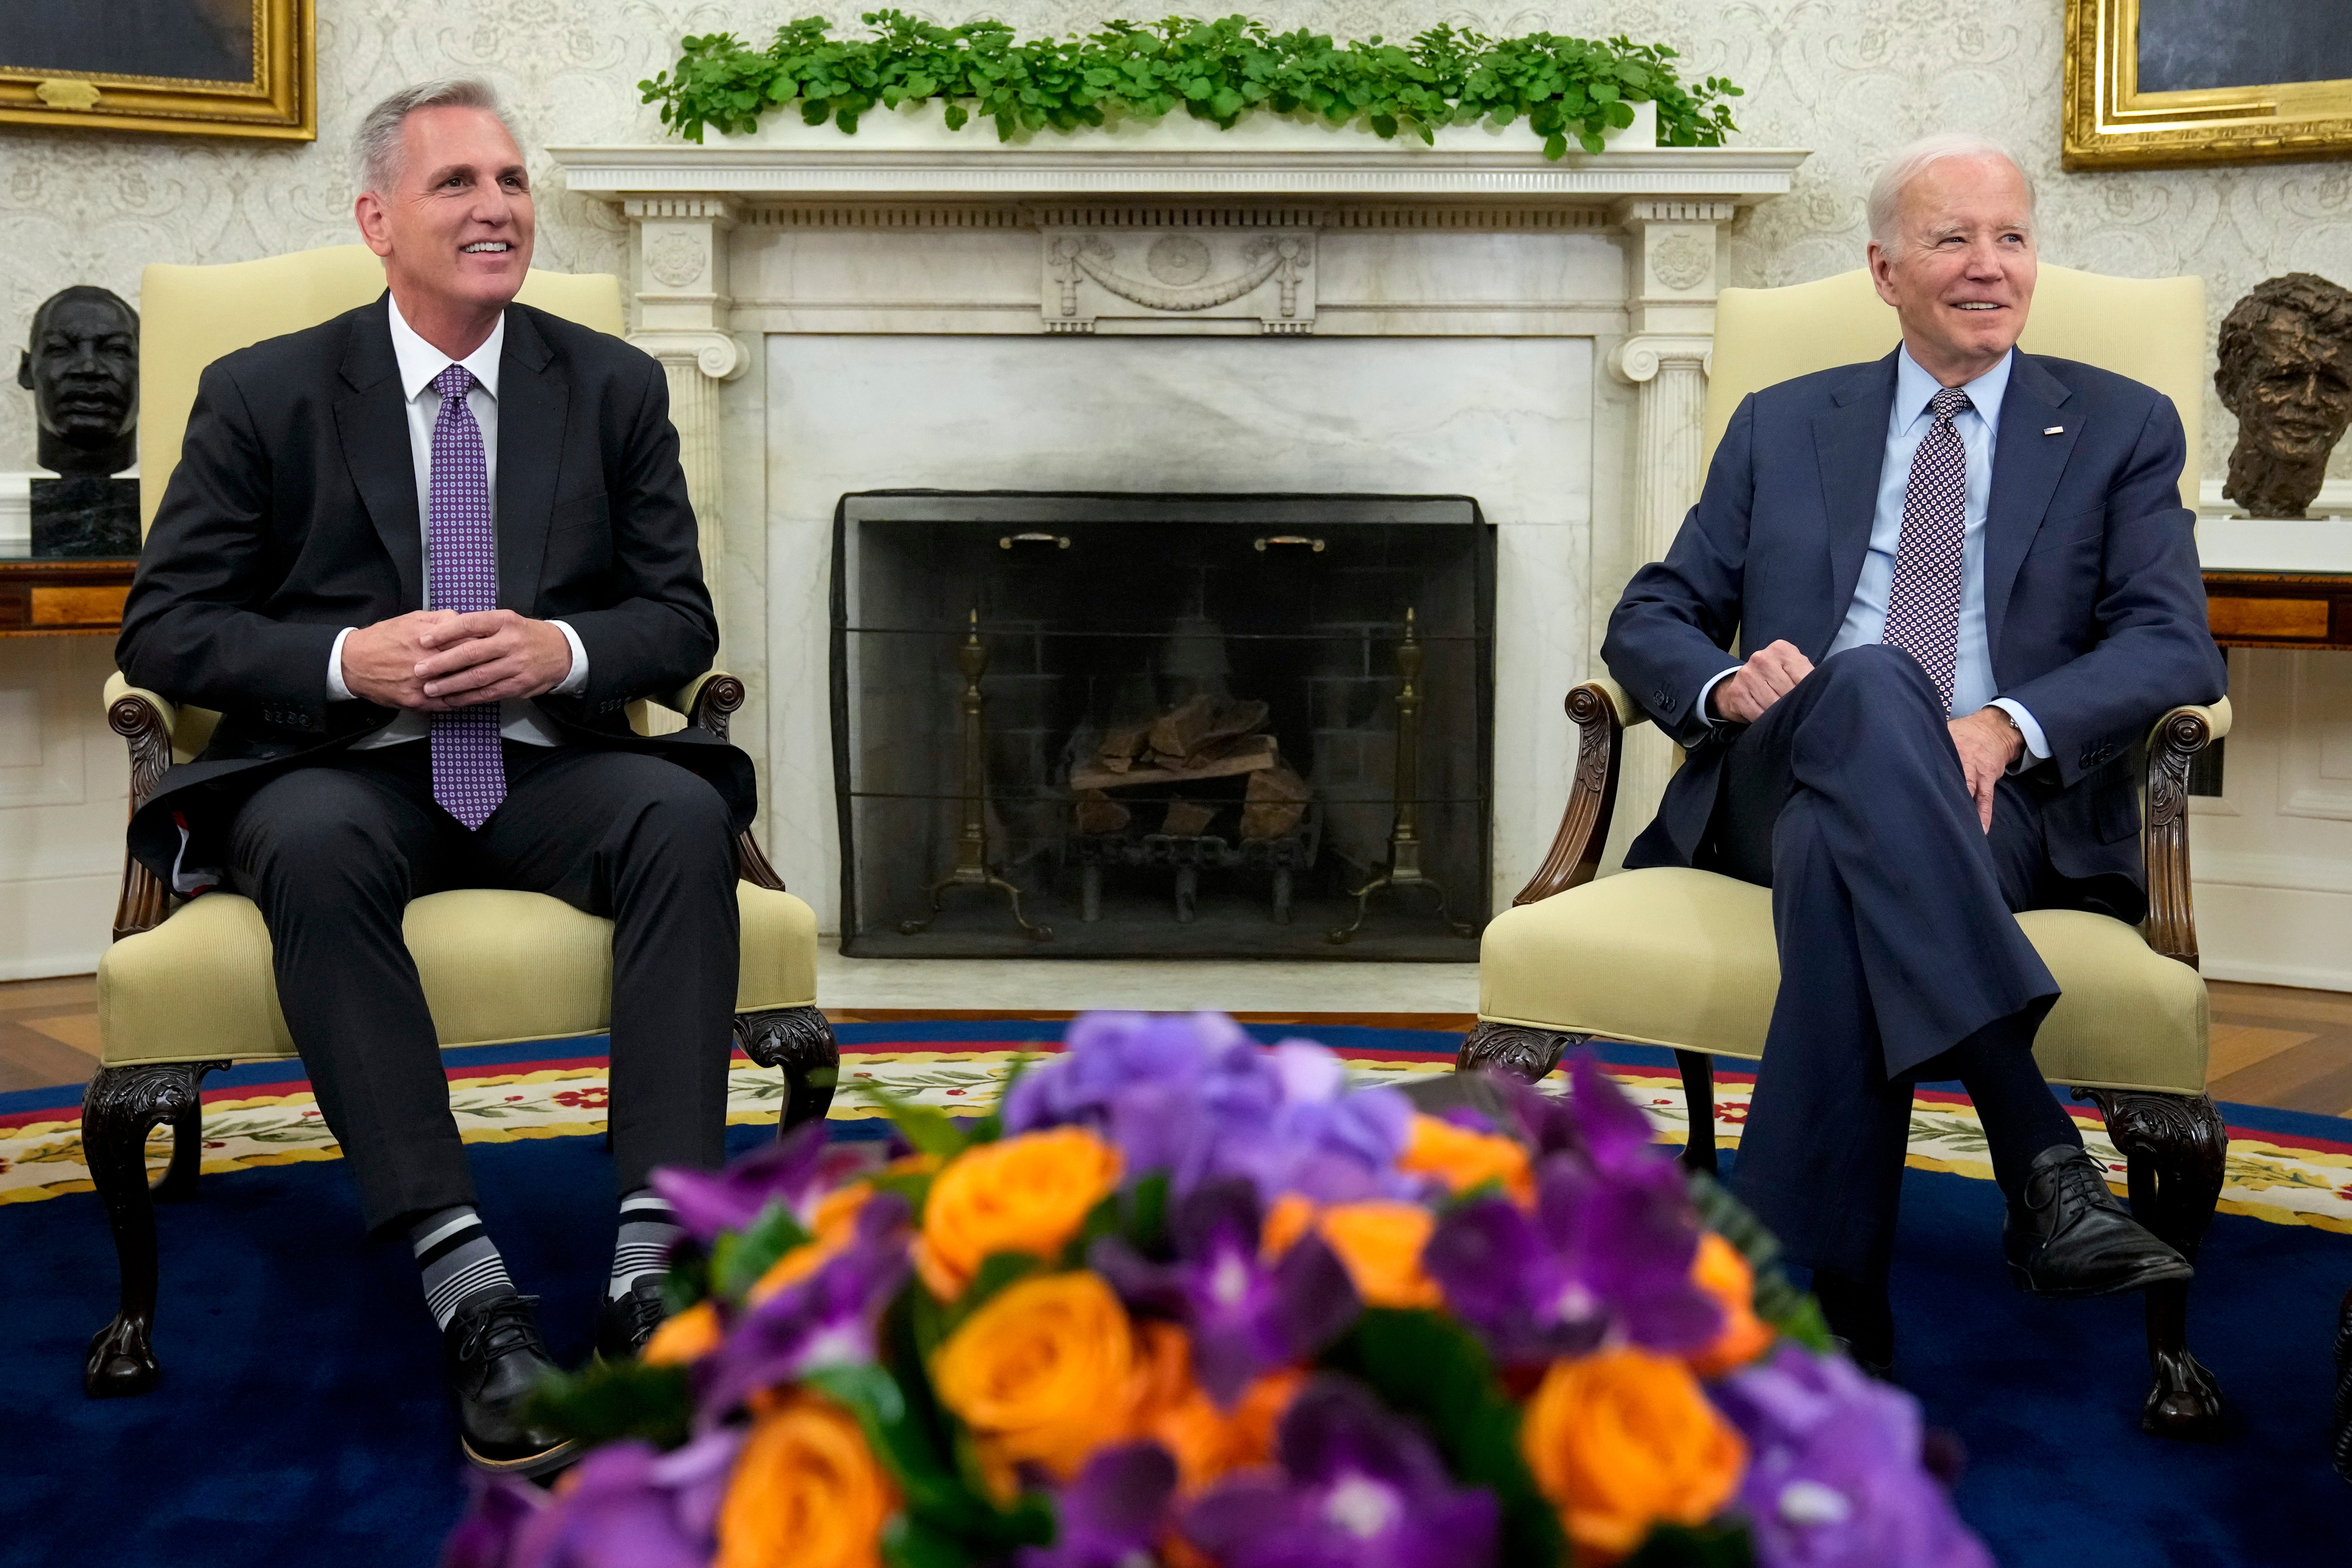 Joe Biden meets with House speaker Kevin McCarthy to discuss the debt limit in the Oval Office of the White House